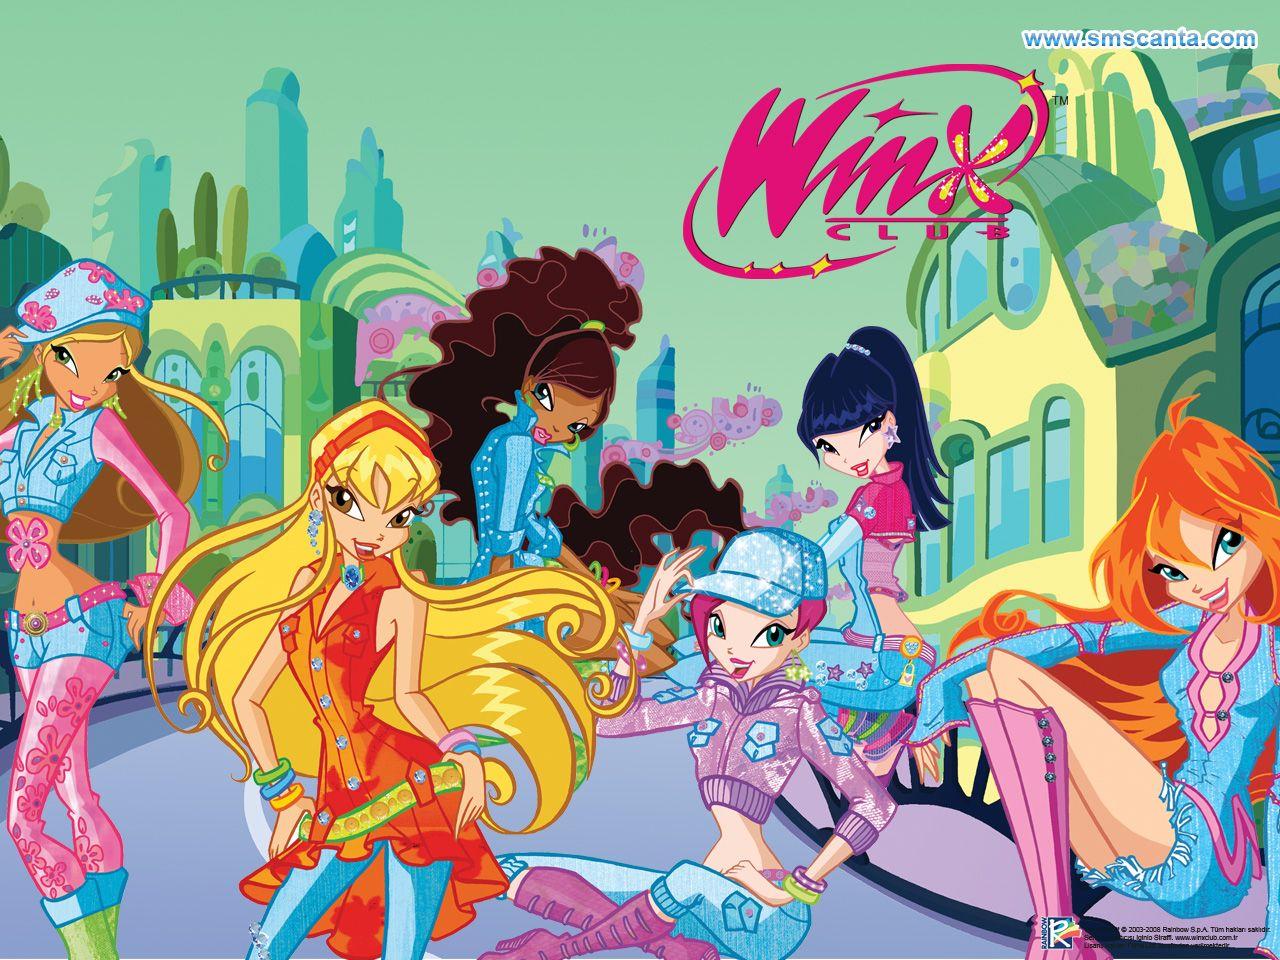 Crazyruby image Winx Club HD wallpaper and background photo